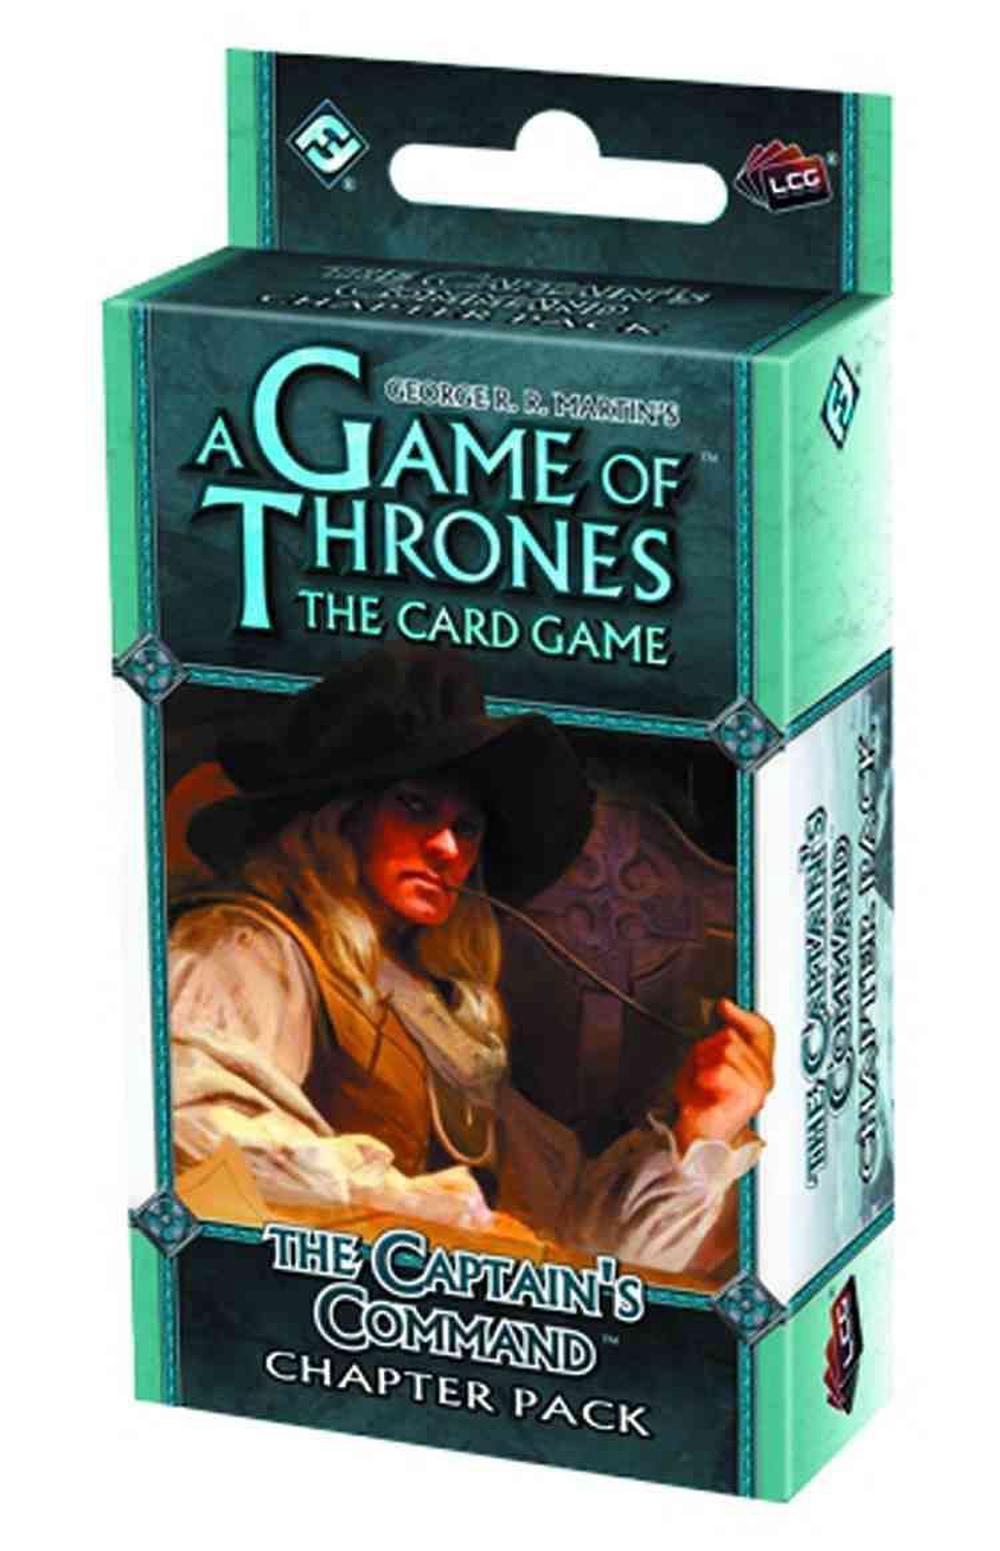  Game of Thrones: The Card Game - The Captain's Command Chapter Pack